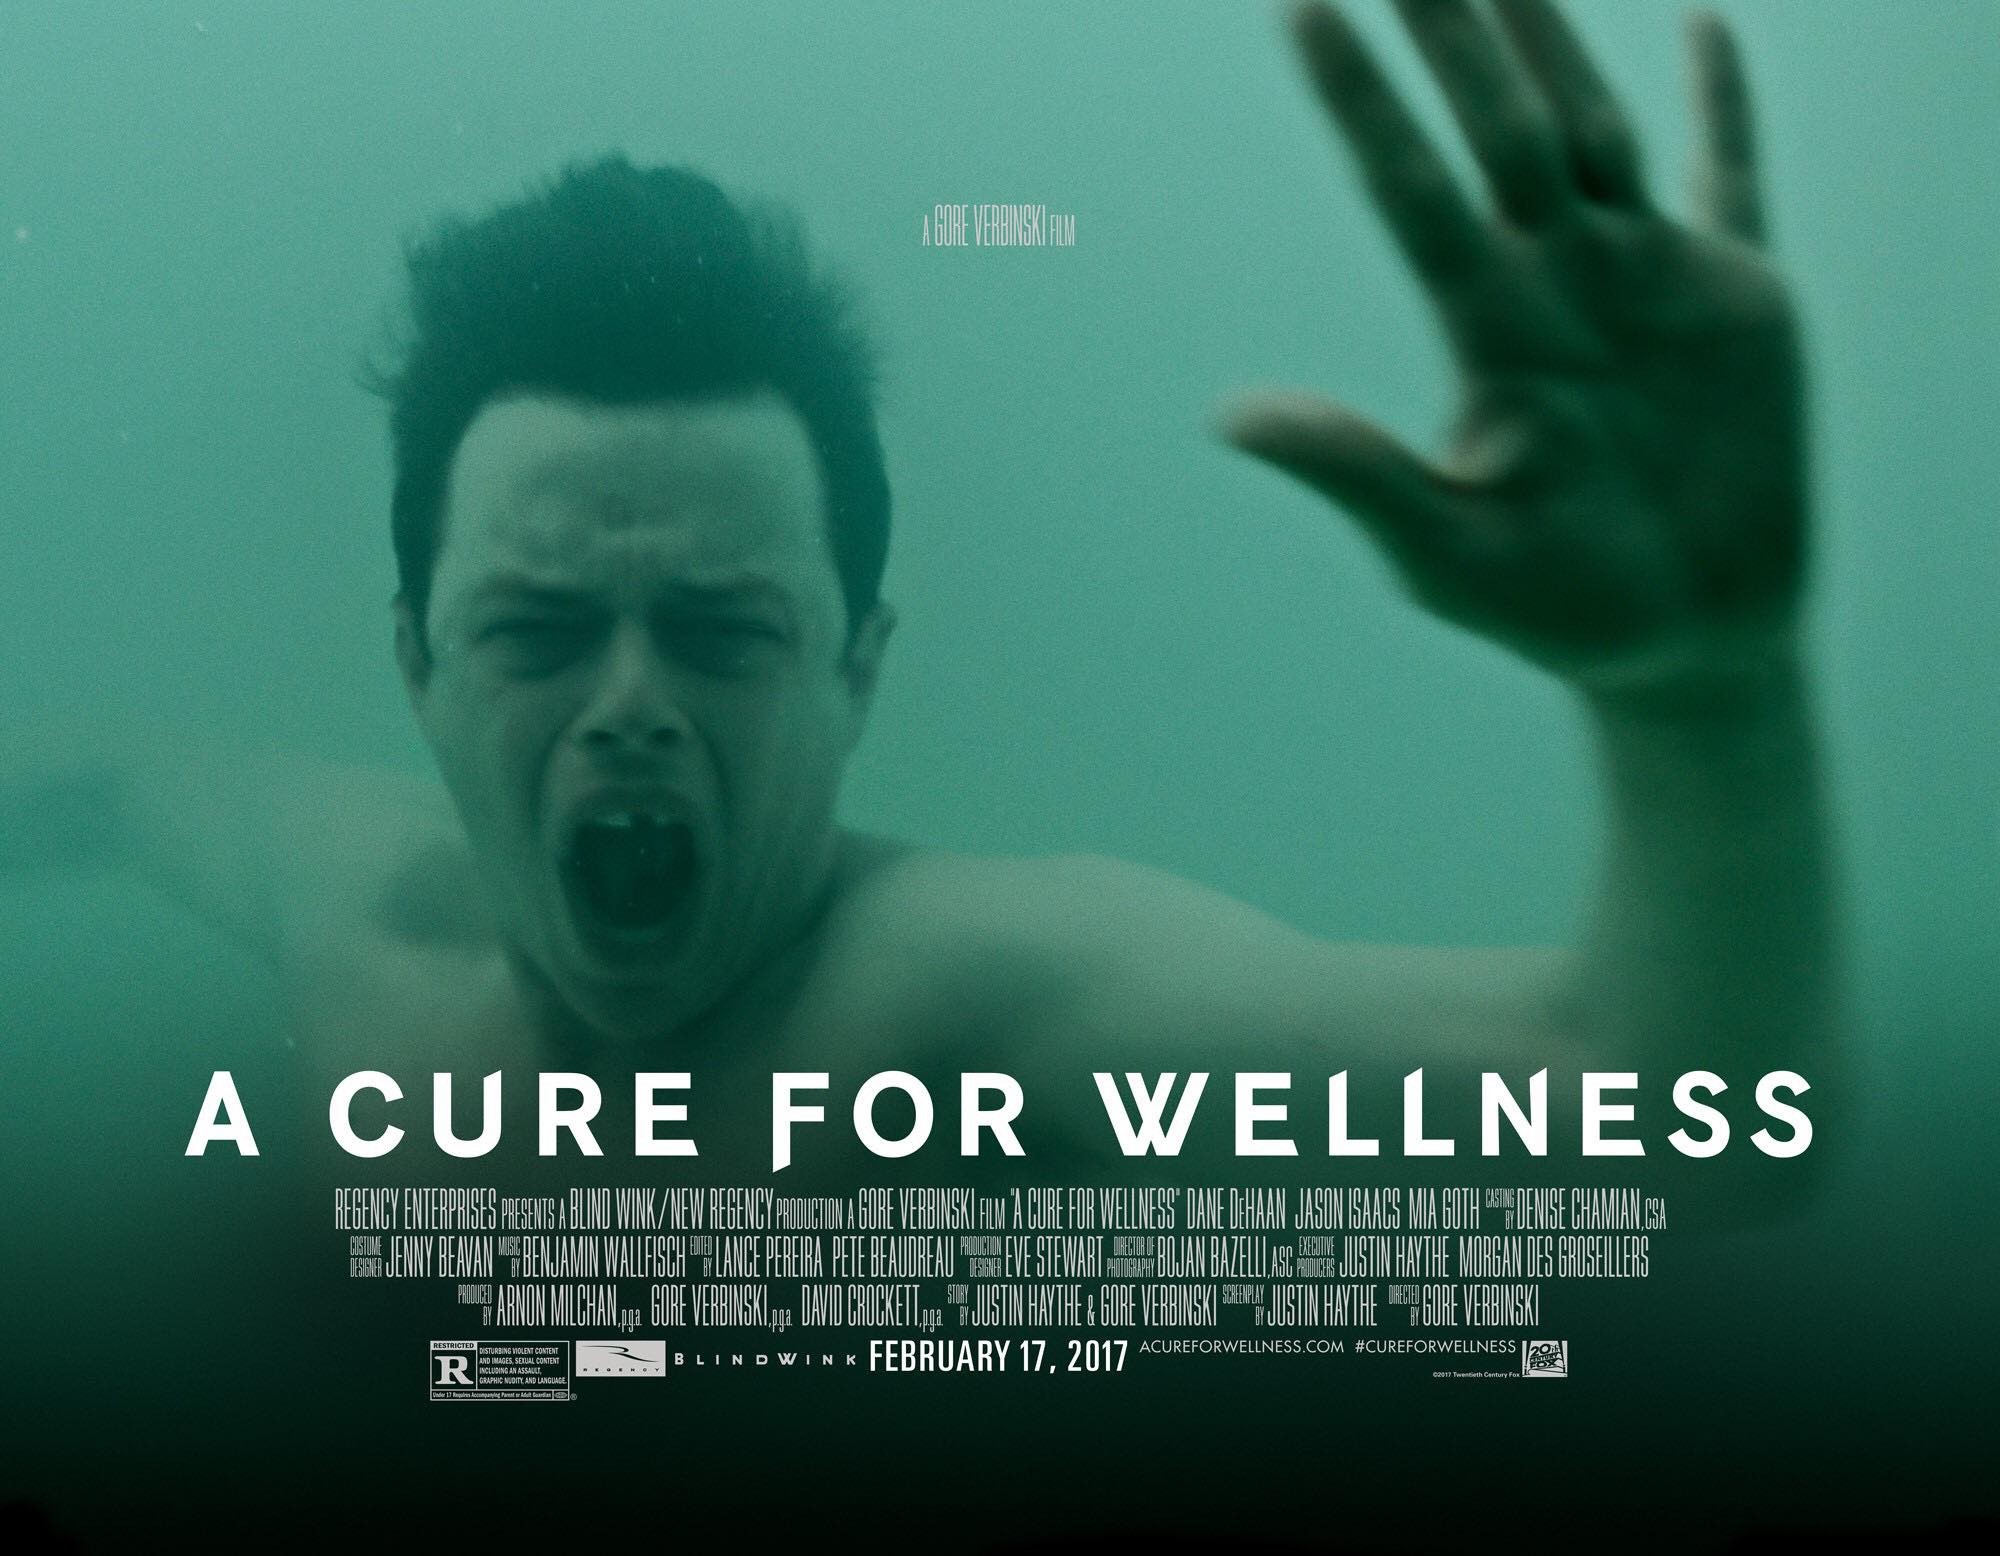 2000x1556 A Cure for Wellness (2017) HD Wallpaper From Gallsource.com